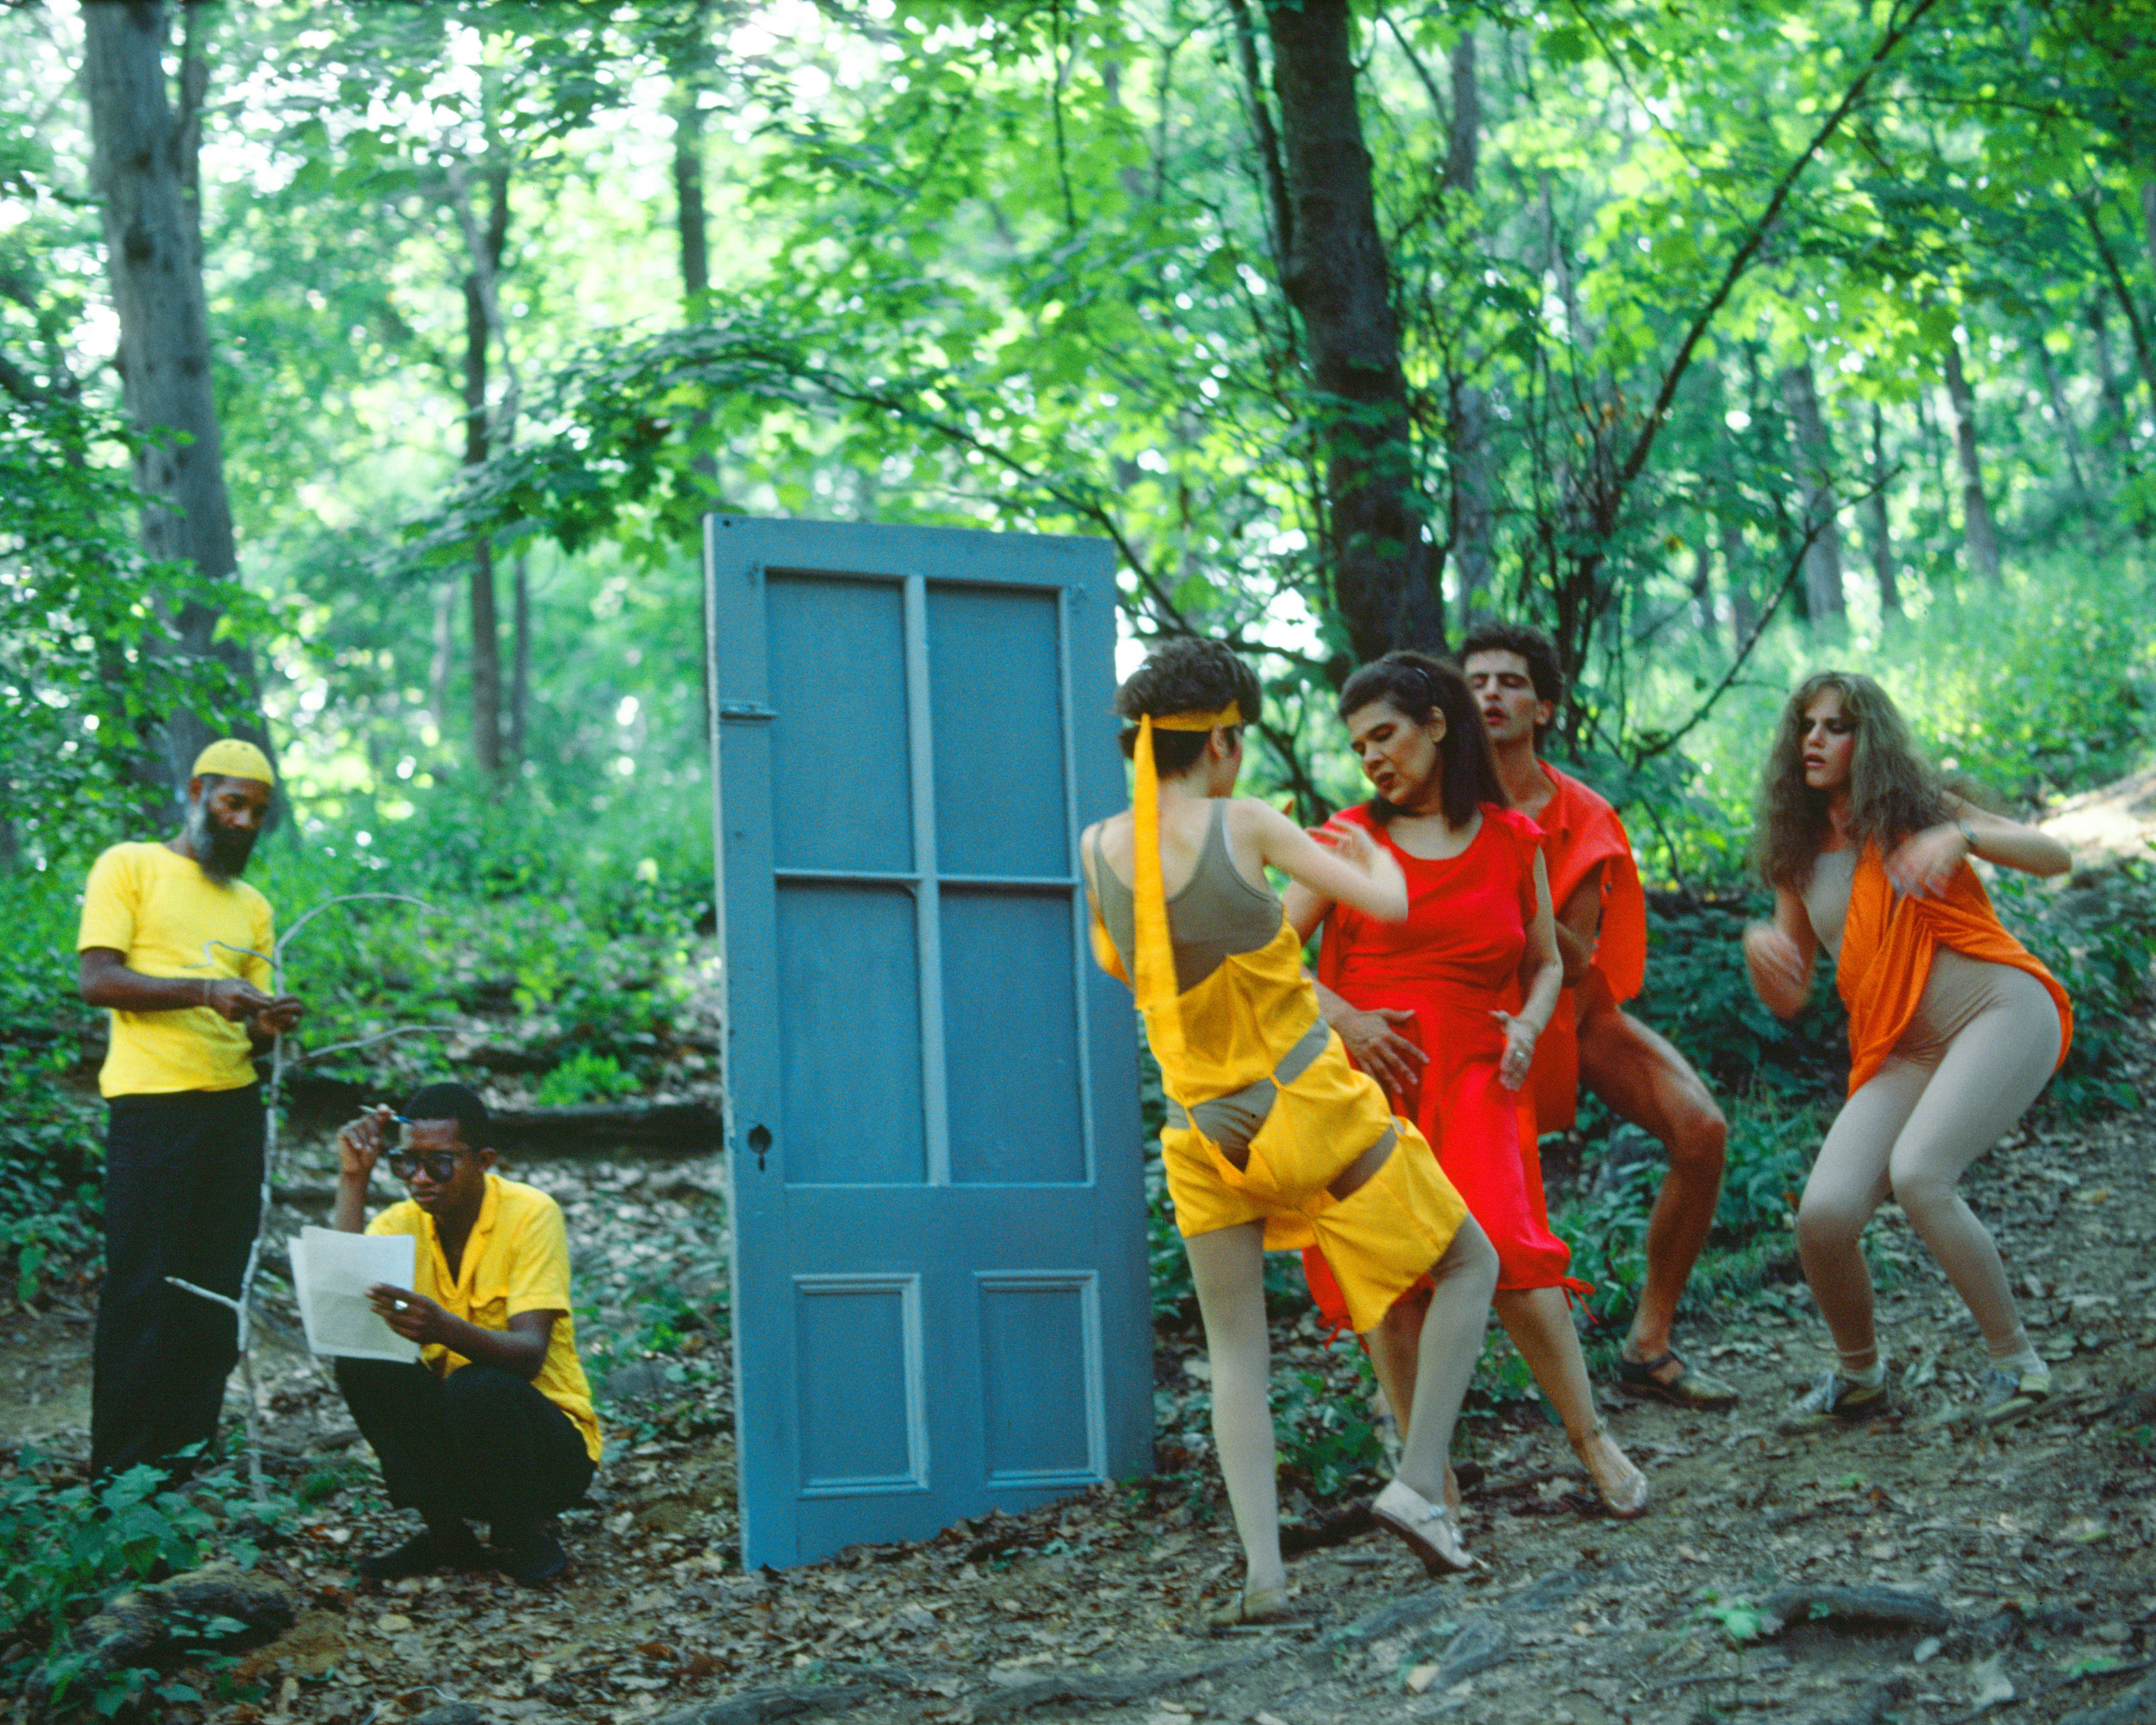 Rivers, First Draft: The Debauchees intersect the Woman in Red, and the rape begins, 1982/2015, Digital C-print from Kodachrome 35mm slides in 48 parts, 16h x 20w in (40.64h x 50.80w cm)